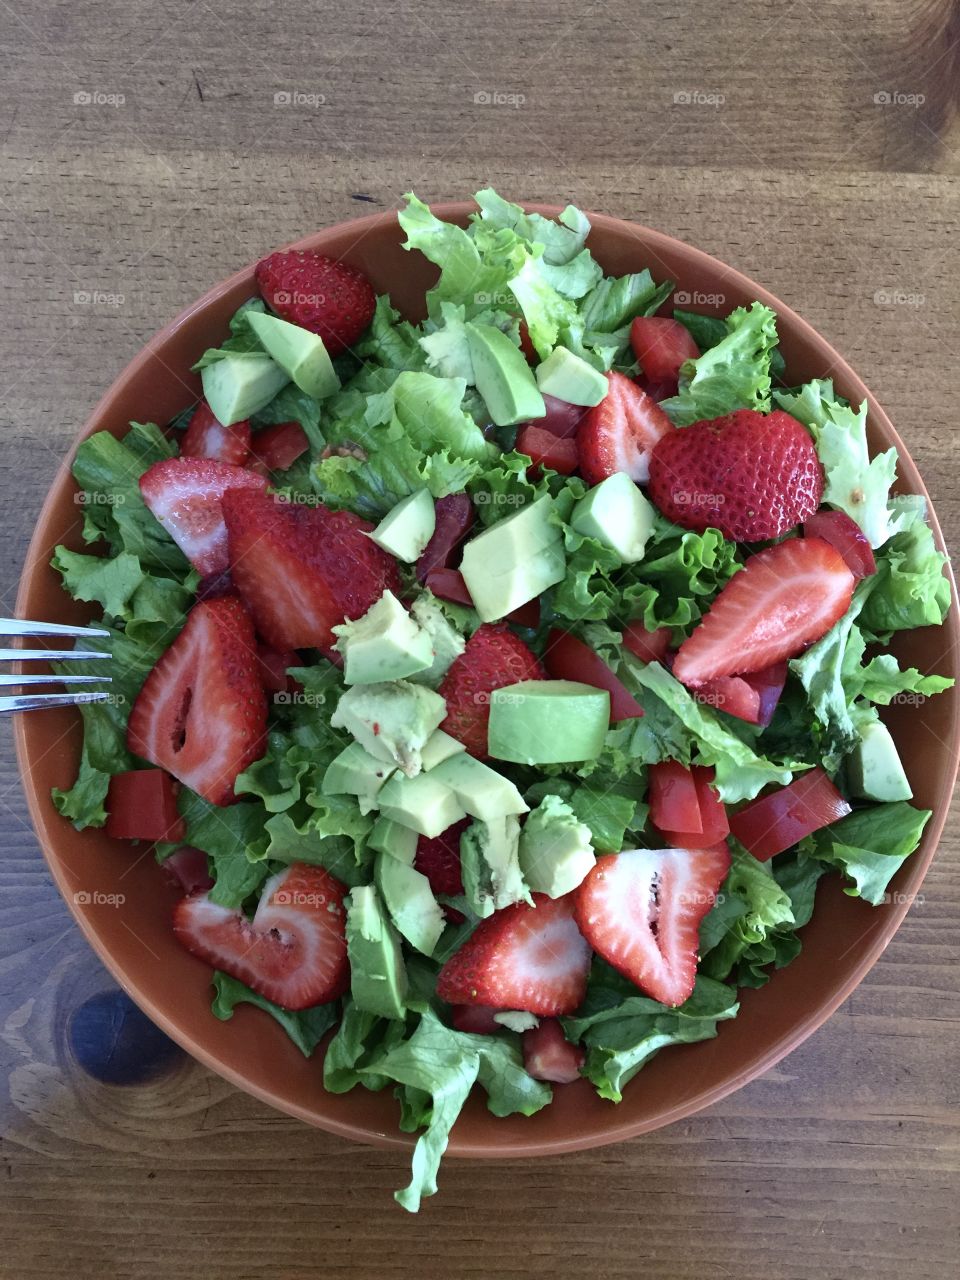 Circular ceramic orange bowl with healthy salad of leaf lettuce, strawberries, avocados, dressing with fork on kitchen table ready for lunch, dinner, or snack